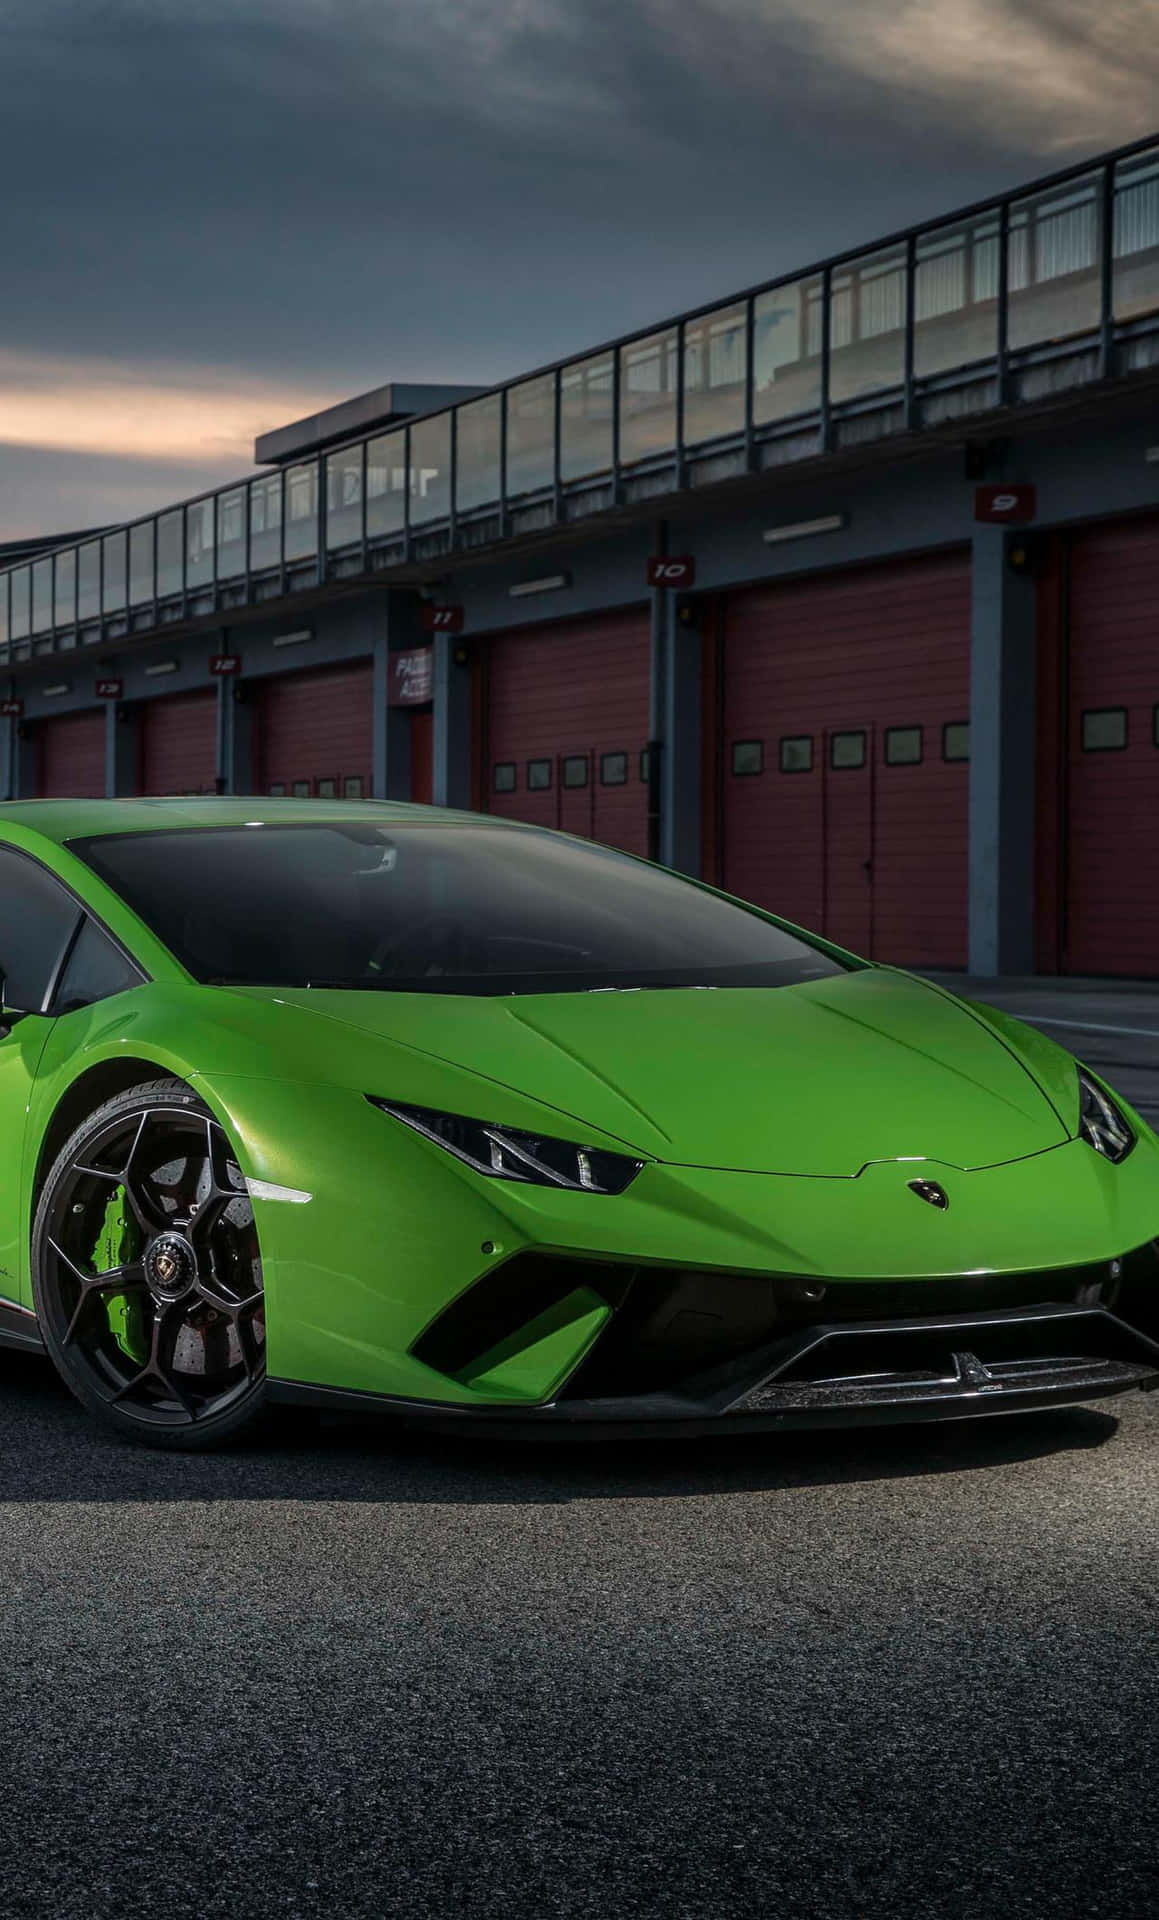 The Green Lamborghini Huracan Is Parked In Front Of A Building Wallpaper